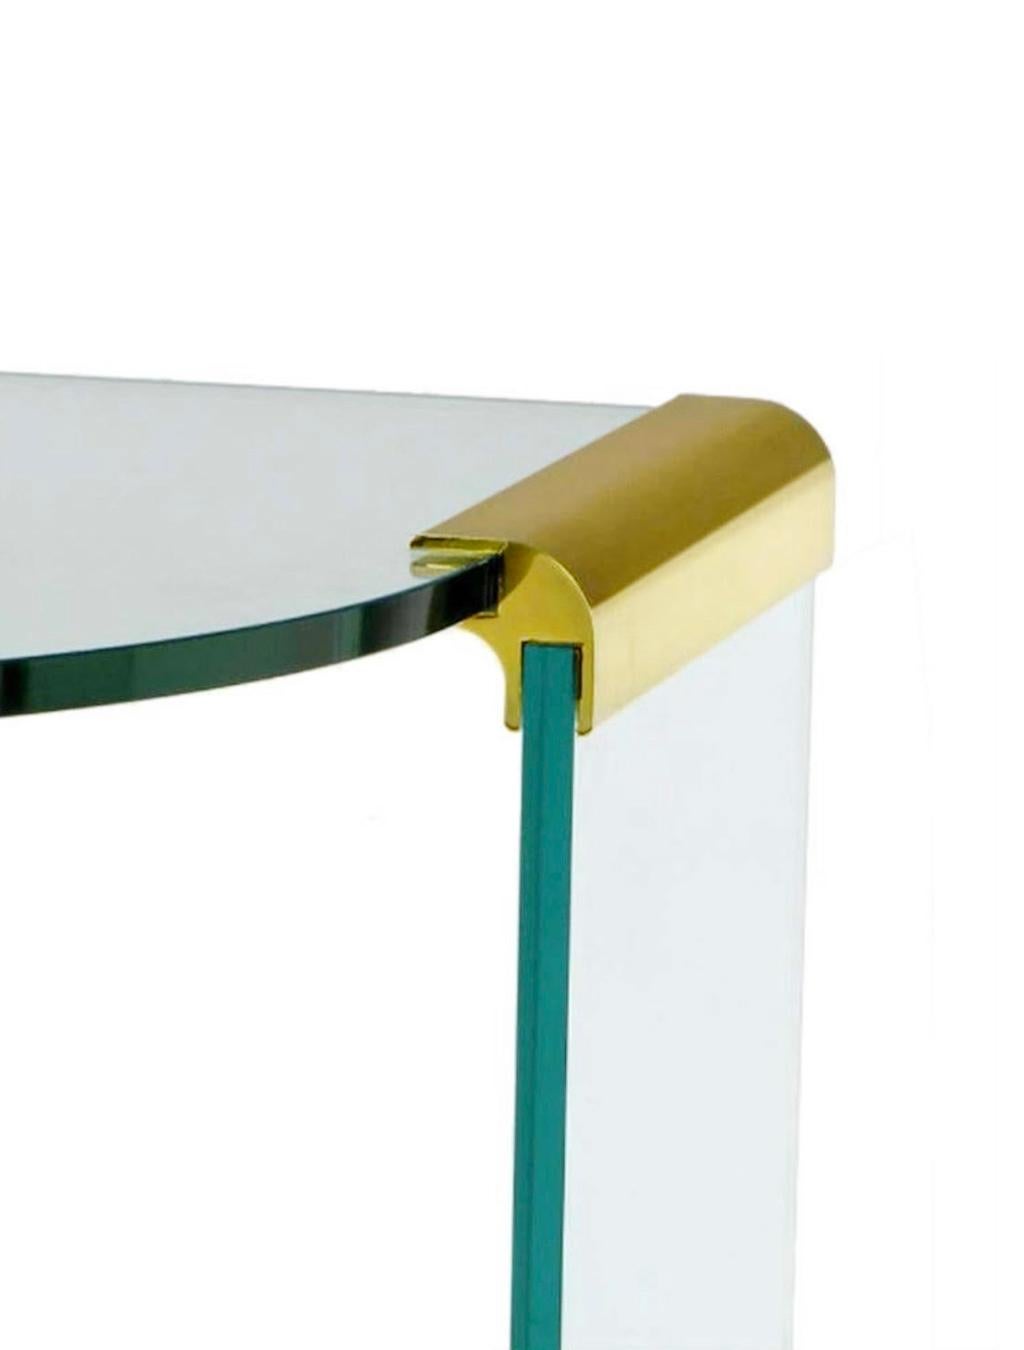 American Mid-Century Modern Brass & Glass Desk or Console Table by Leon Rosen for Pace